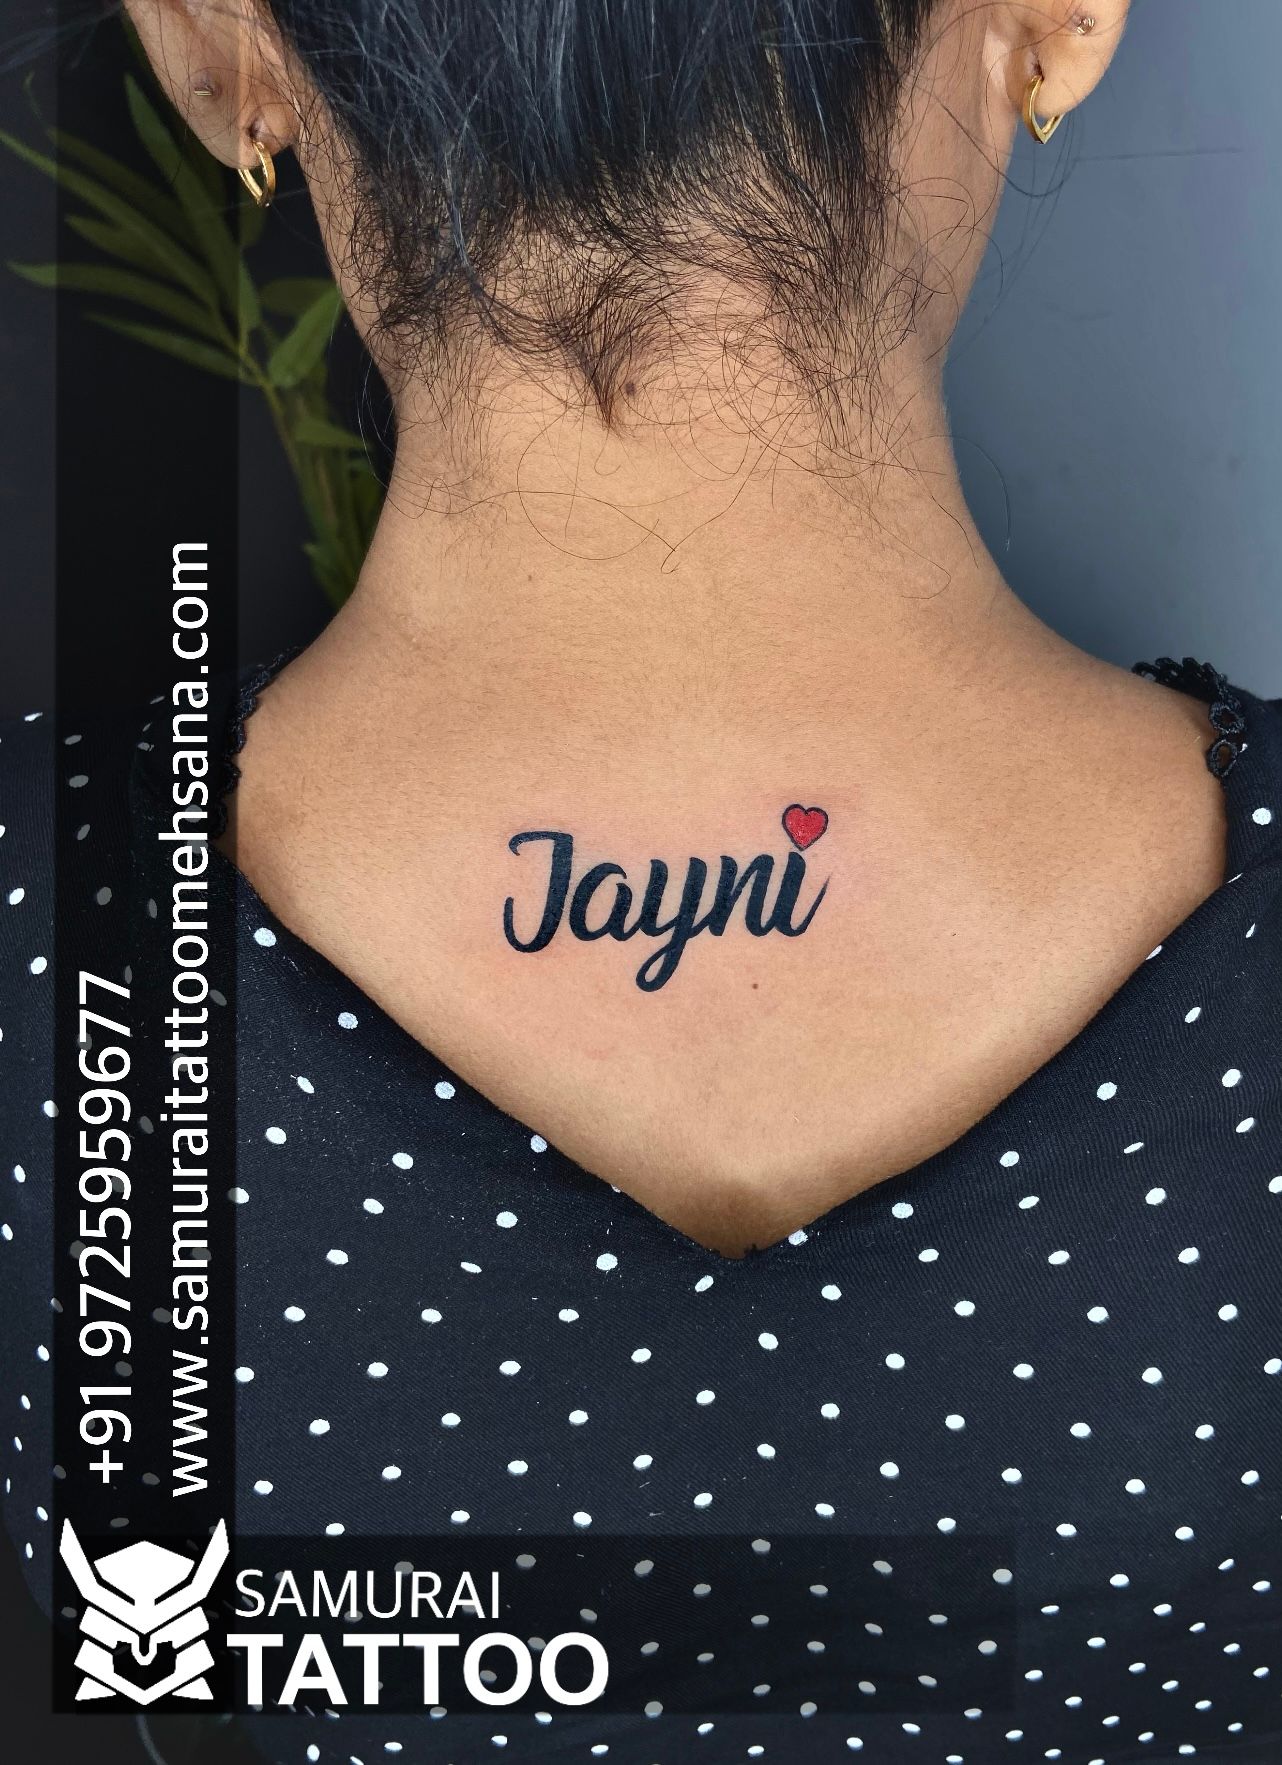 Top 10 trending tattoos in India  Fashion News  The Indian Express